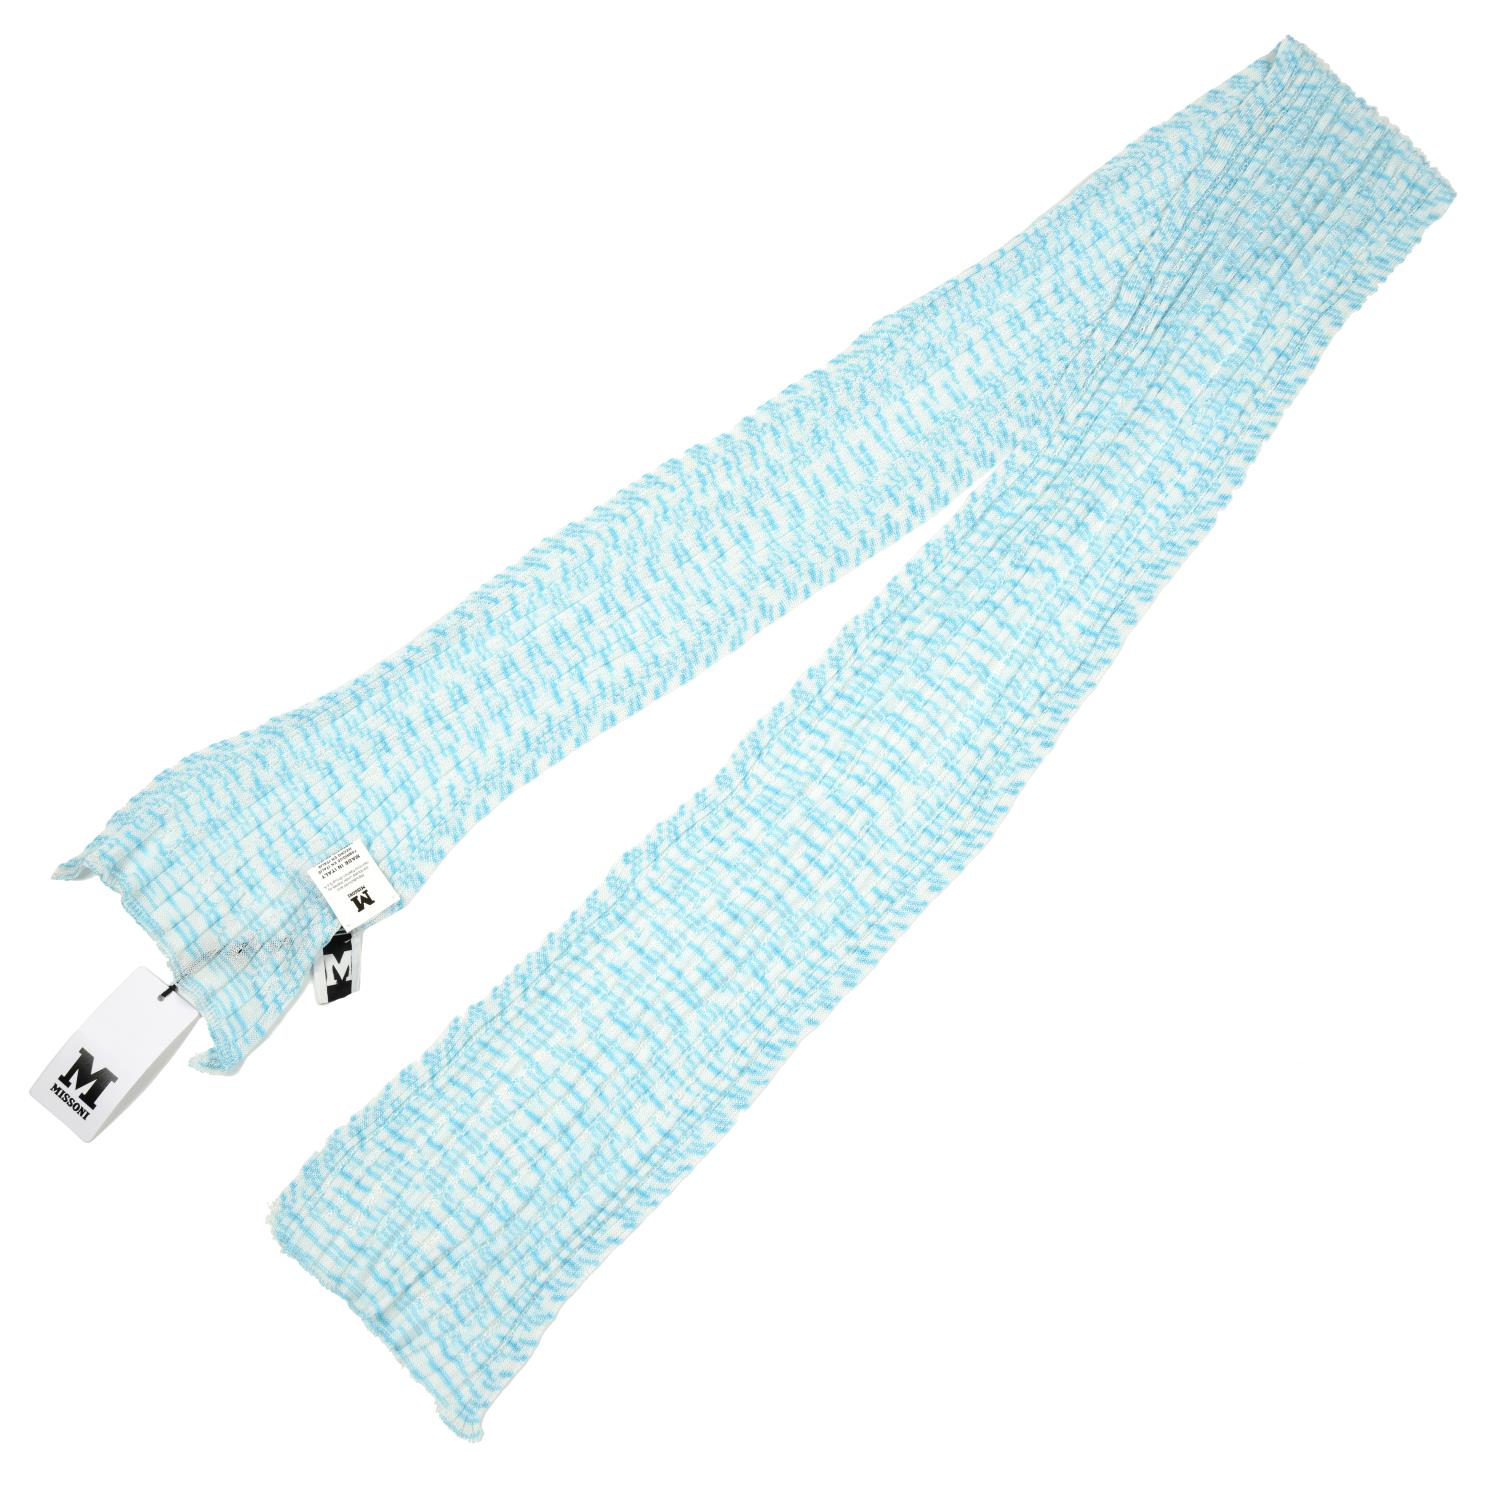 MISSONI - a white and blue scarf. - Image 2 of 2